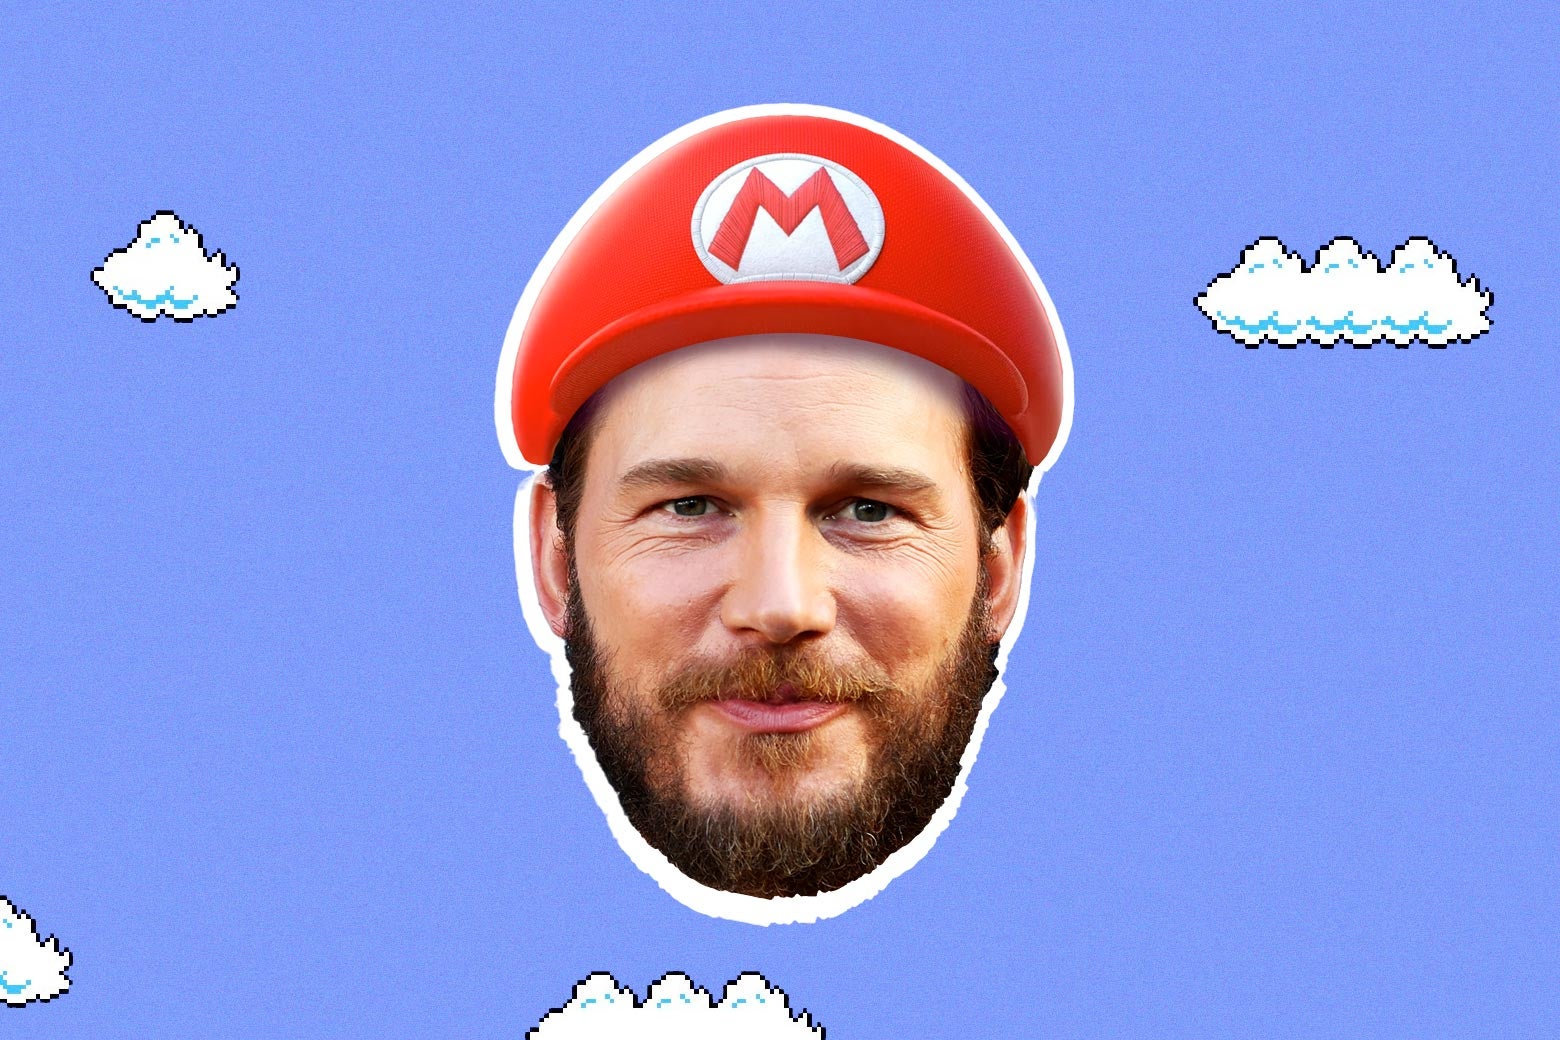 A man with a brown beard wears a red hat that says the letter M on it. His head is floating atop a blue sky background with white clouds. 